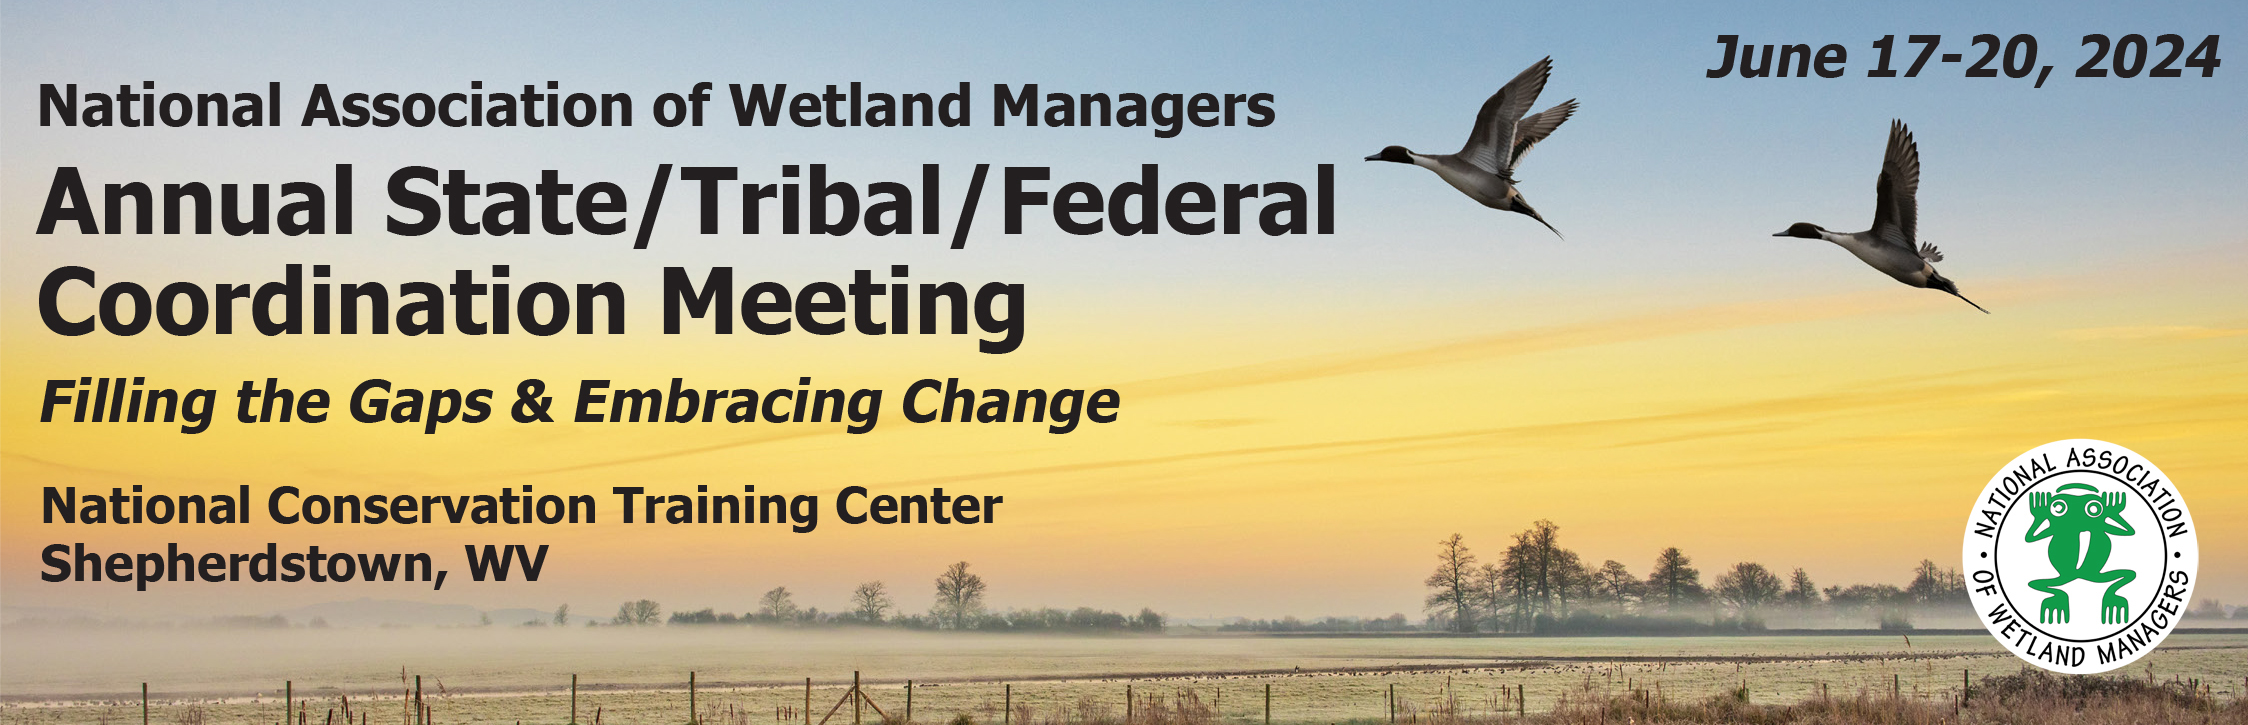 2024 NAWM's Annual State/Tribal/Federal Coordination Meeting